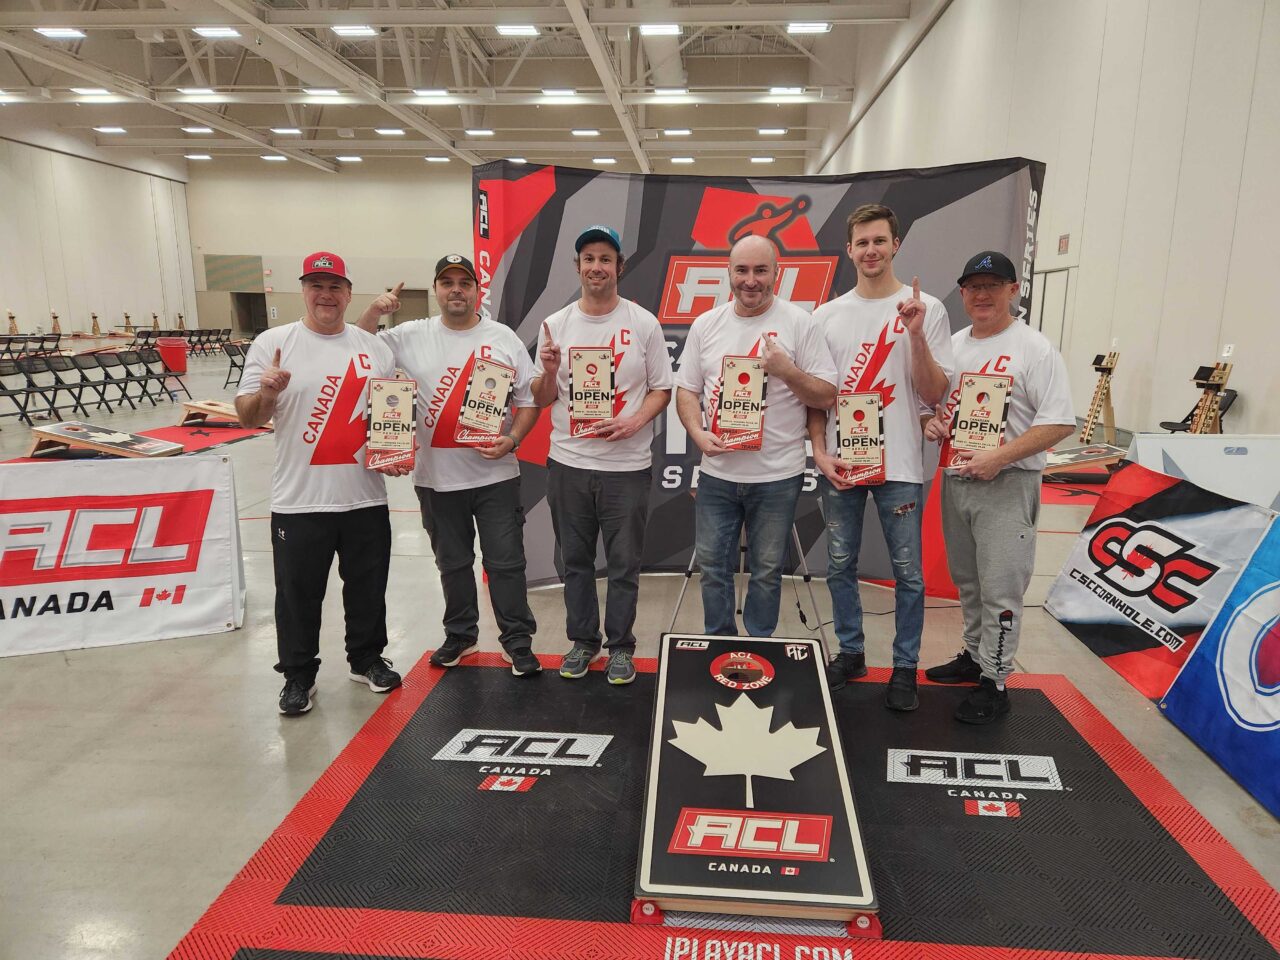 US team takes home the victory at the WCO Teams event in Canada